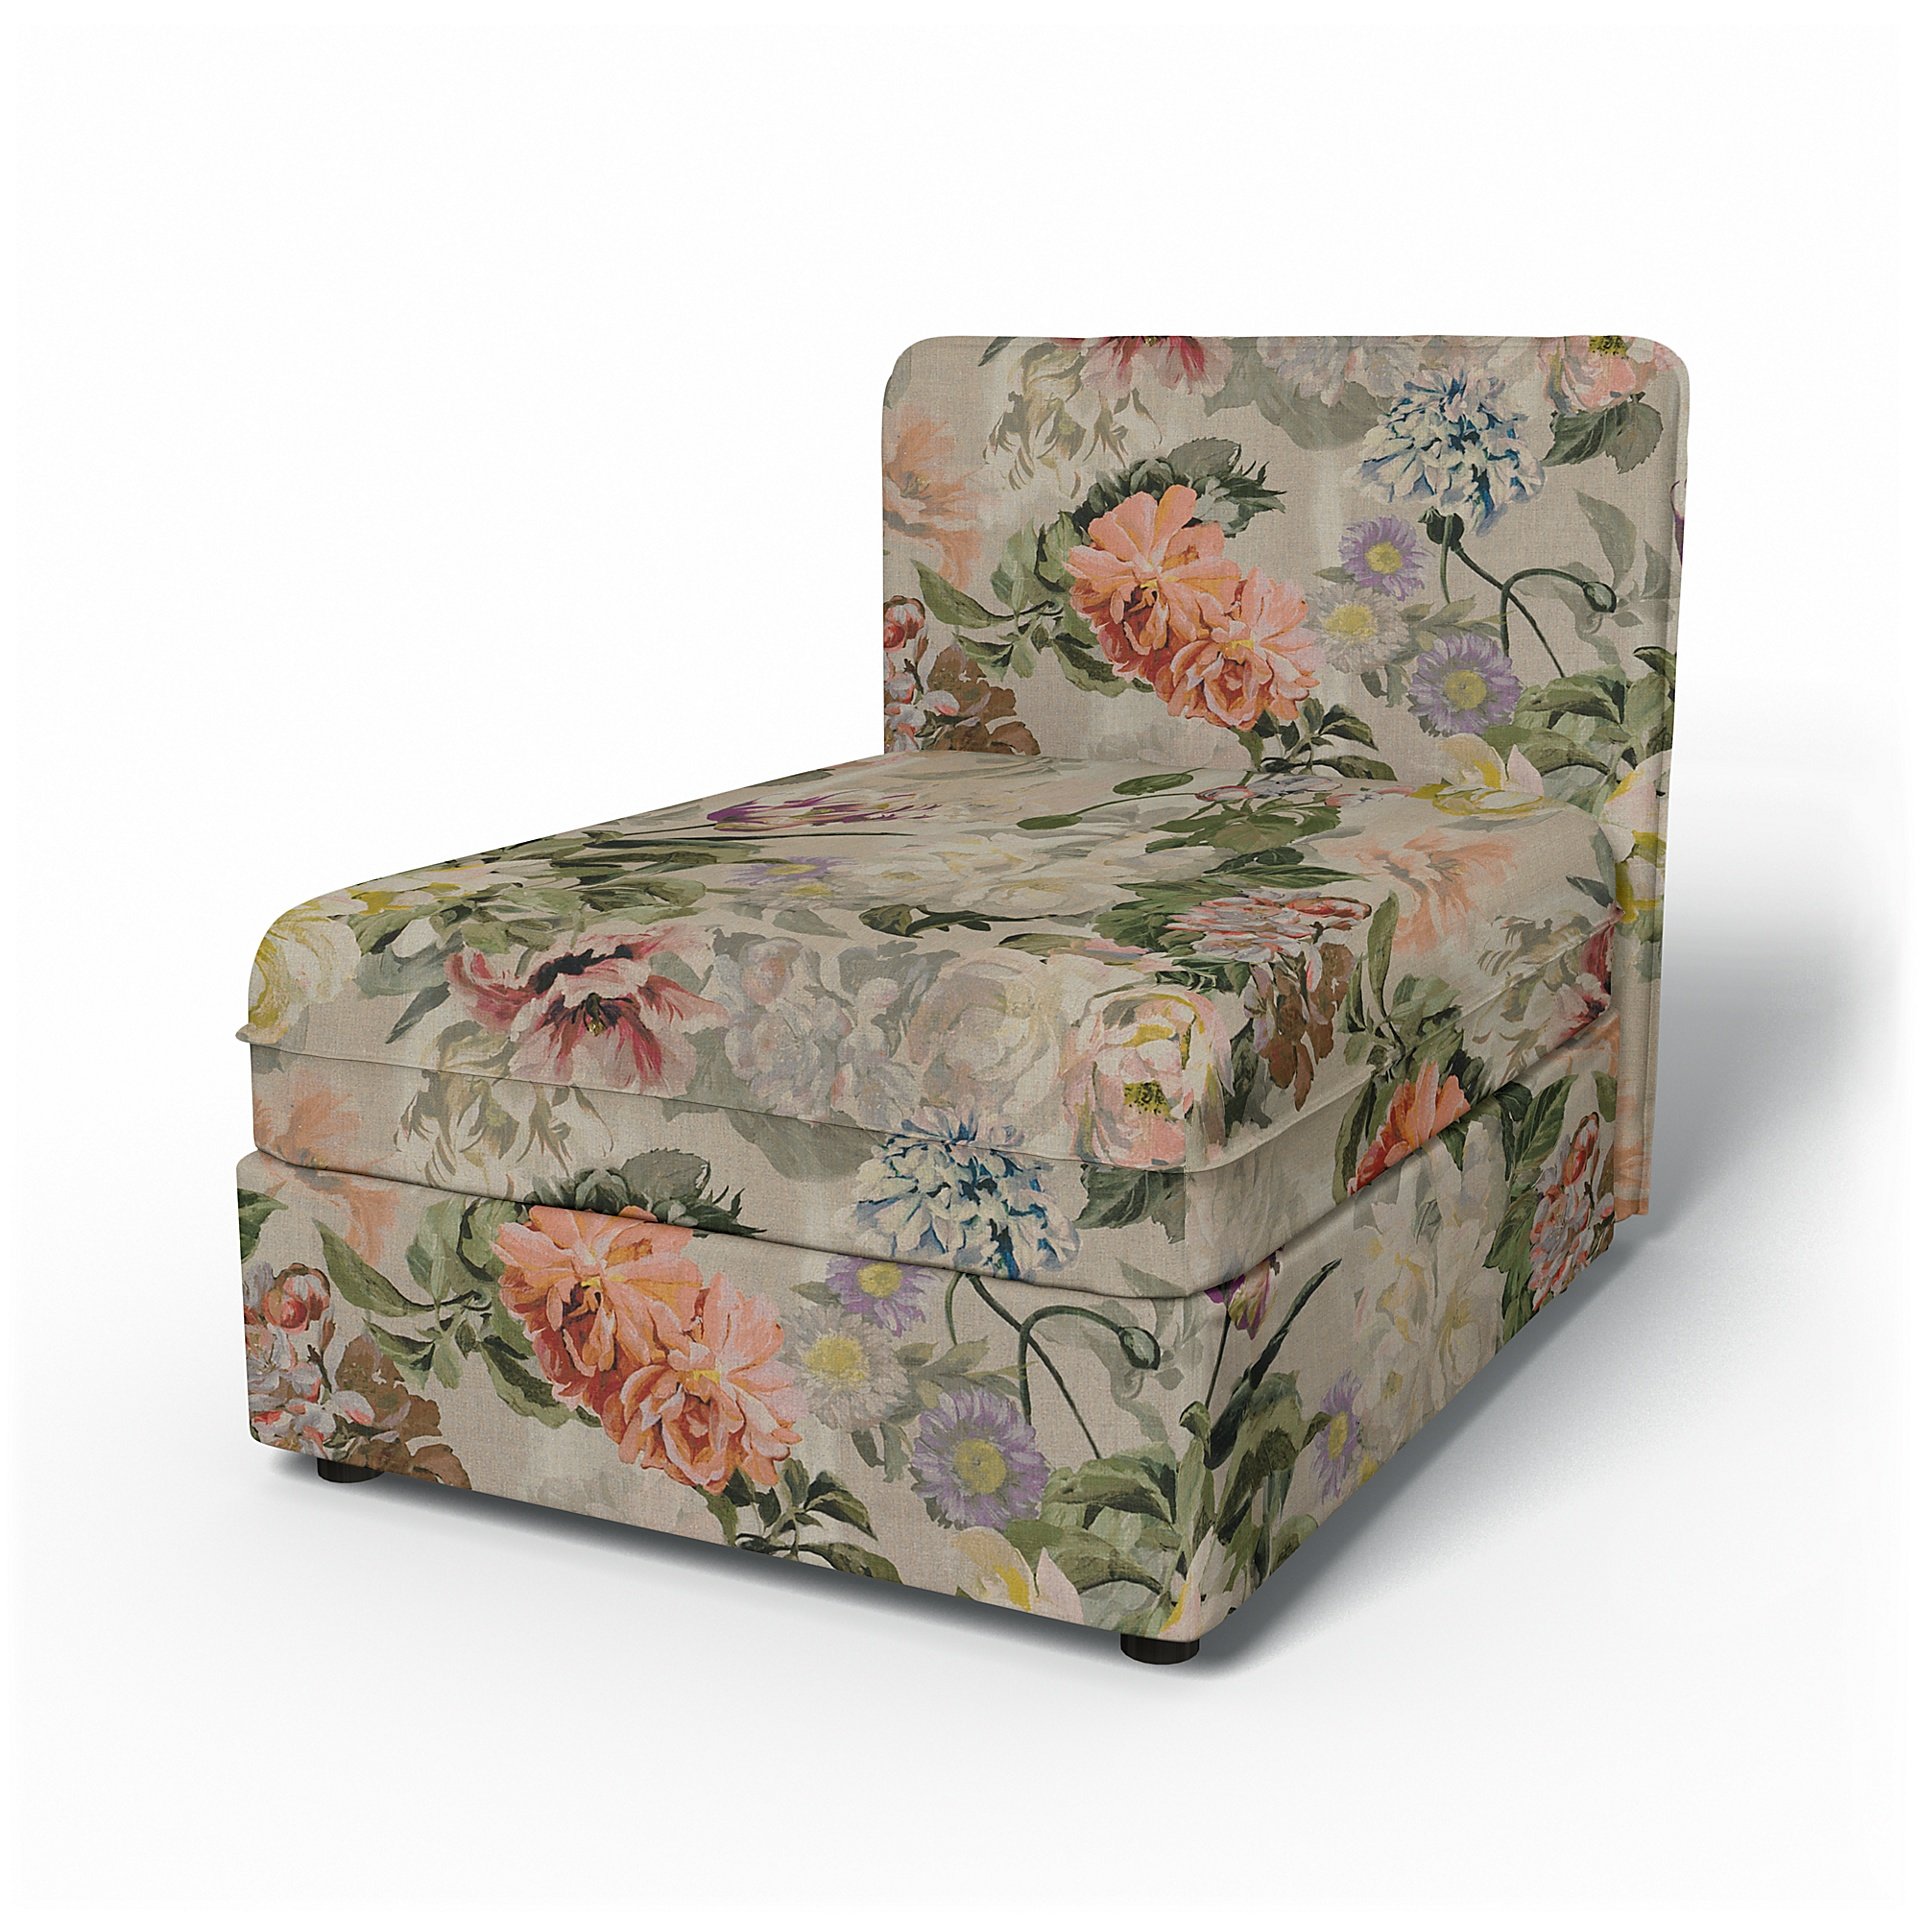 IKEA - Vallentuna Seat Module with Low Back Cover 80x100cm 32x39in, Delft Flower - Tuberose, Linen -